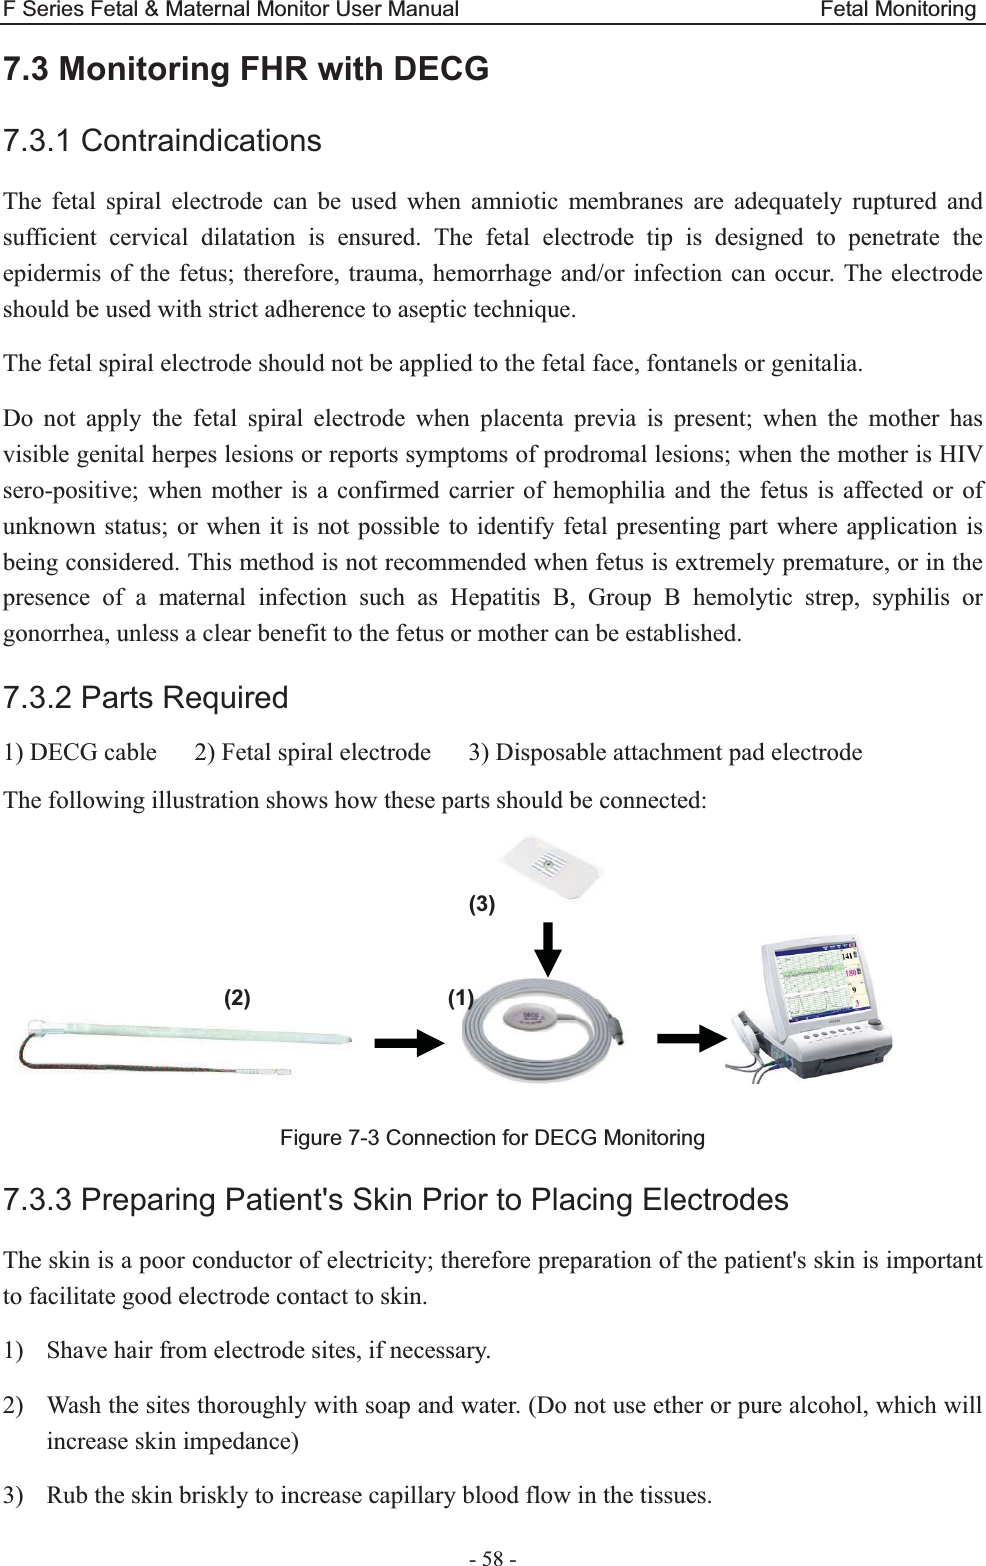 F Series Fetal &amp; Maternal Monitor User Manual                                 Fetal Monitoring - 58 - 7.3 Monitoring FHR with DECG7.3.1 Contraindications The fetal spiral electrode can be used when amniotic membranes are adequately ruptured and sufficient cervical dilatation is ensured. The fetal electrode tip is designed to penetrate the epidermis of the fetus; therefore, trauma, hemorrhage and/or infection can occur. The electrode should be used with strict adherence to aseptic technique. The fetal spiral electrode should not be applied to the fetal face, fontanels or genitalia. Do not apply the fetal spiral electrode when placenta previa is present; when the mother has visible genital herpes lesions or reports symptoms of prodromal lesions; when the mother is HIV sero-positive; when mother is a confirmed carrier of hemophilia and the fetus is affected or of unknown status; or when it is not possible to identify fetal presenting part where application is being considered. This method is not recommended when fetus is extremely premature, or in the presence of a maternal infection such as Hepatitis B, Group B hemolytic strep, syphilis or gonorrhea, unless a clear benefit to the fetus or mother can be established. 7.3.2 Parts Required 1) DECG cable      2) Fetal spiral electrode      3) Disposable attachment pad electrode The following illustration shows how these parts should be connected:                          Figure 7-3 Connection for DECG Monitoring 7.3.3 Preparing Patient&apos;s Skin Prior to Placing Electrodes The skin is a poor conductor of electricity; therefore preparation of the patient&apos;s skin is important to facilitate good electrode contact to skin. 1) Shave hair from electrode sites, if necessary. 2) Wash the sites thoroughly with soap and water. (Do not use ether or pure alcohol, which will increase skin impedance) 3) Rub the skin briskly to increase capillary blood flow in the tissues. (3)(2)                 (1)